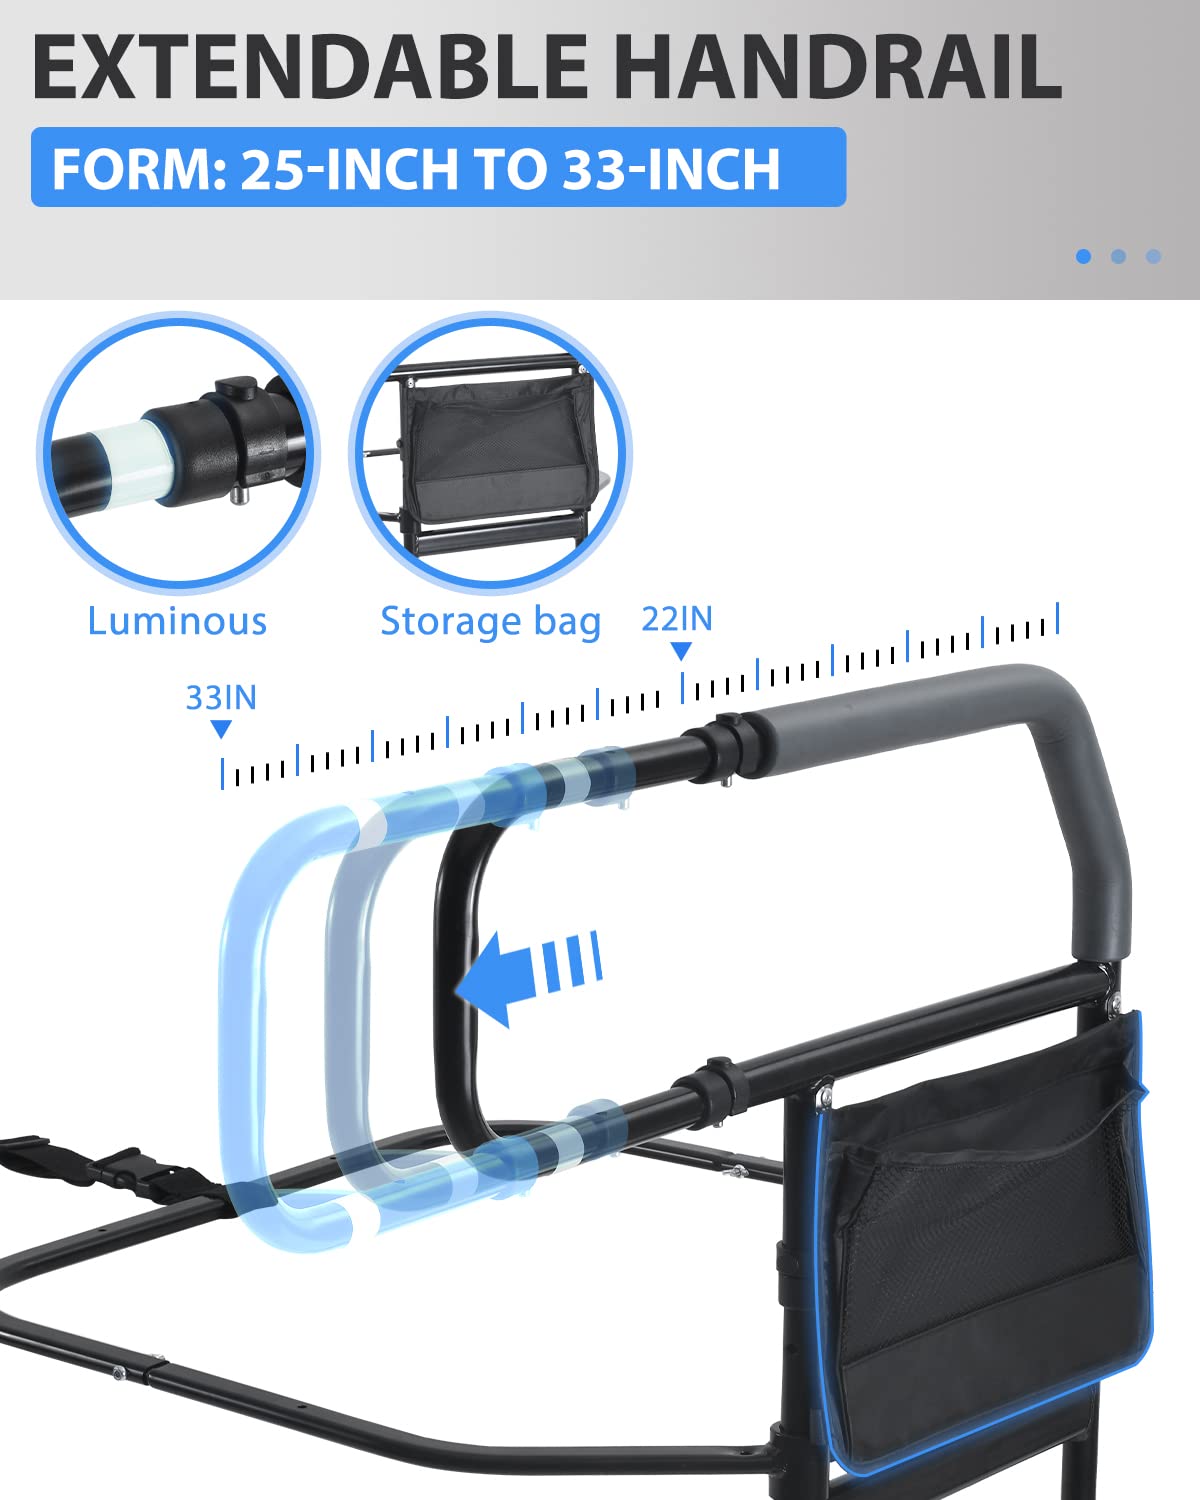 Sangohe Bed Rail for Elderly, Bed Assist Grab Bar Handle with Storage Pocket, Safety Bed Rails for Elderly Adults Getting in & Out of Bed at Home and Dorm - Fit King, Queen, Full, Twin